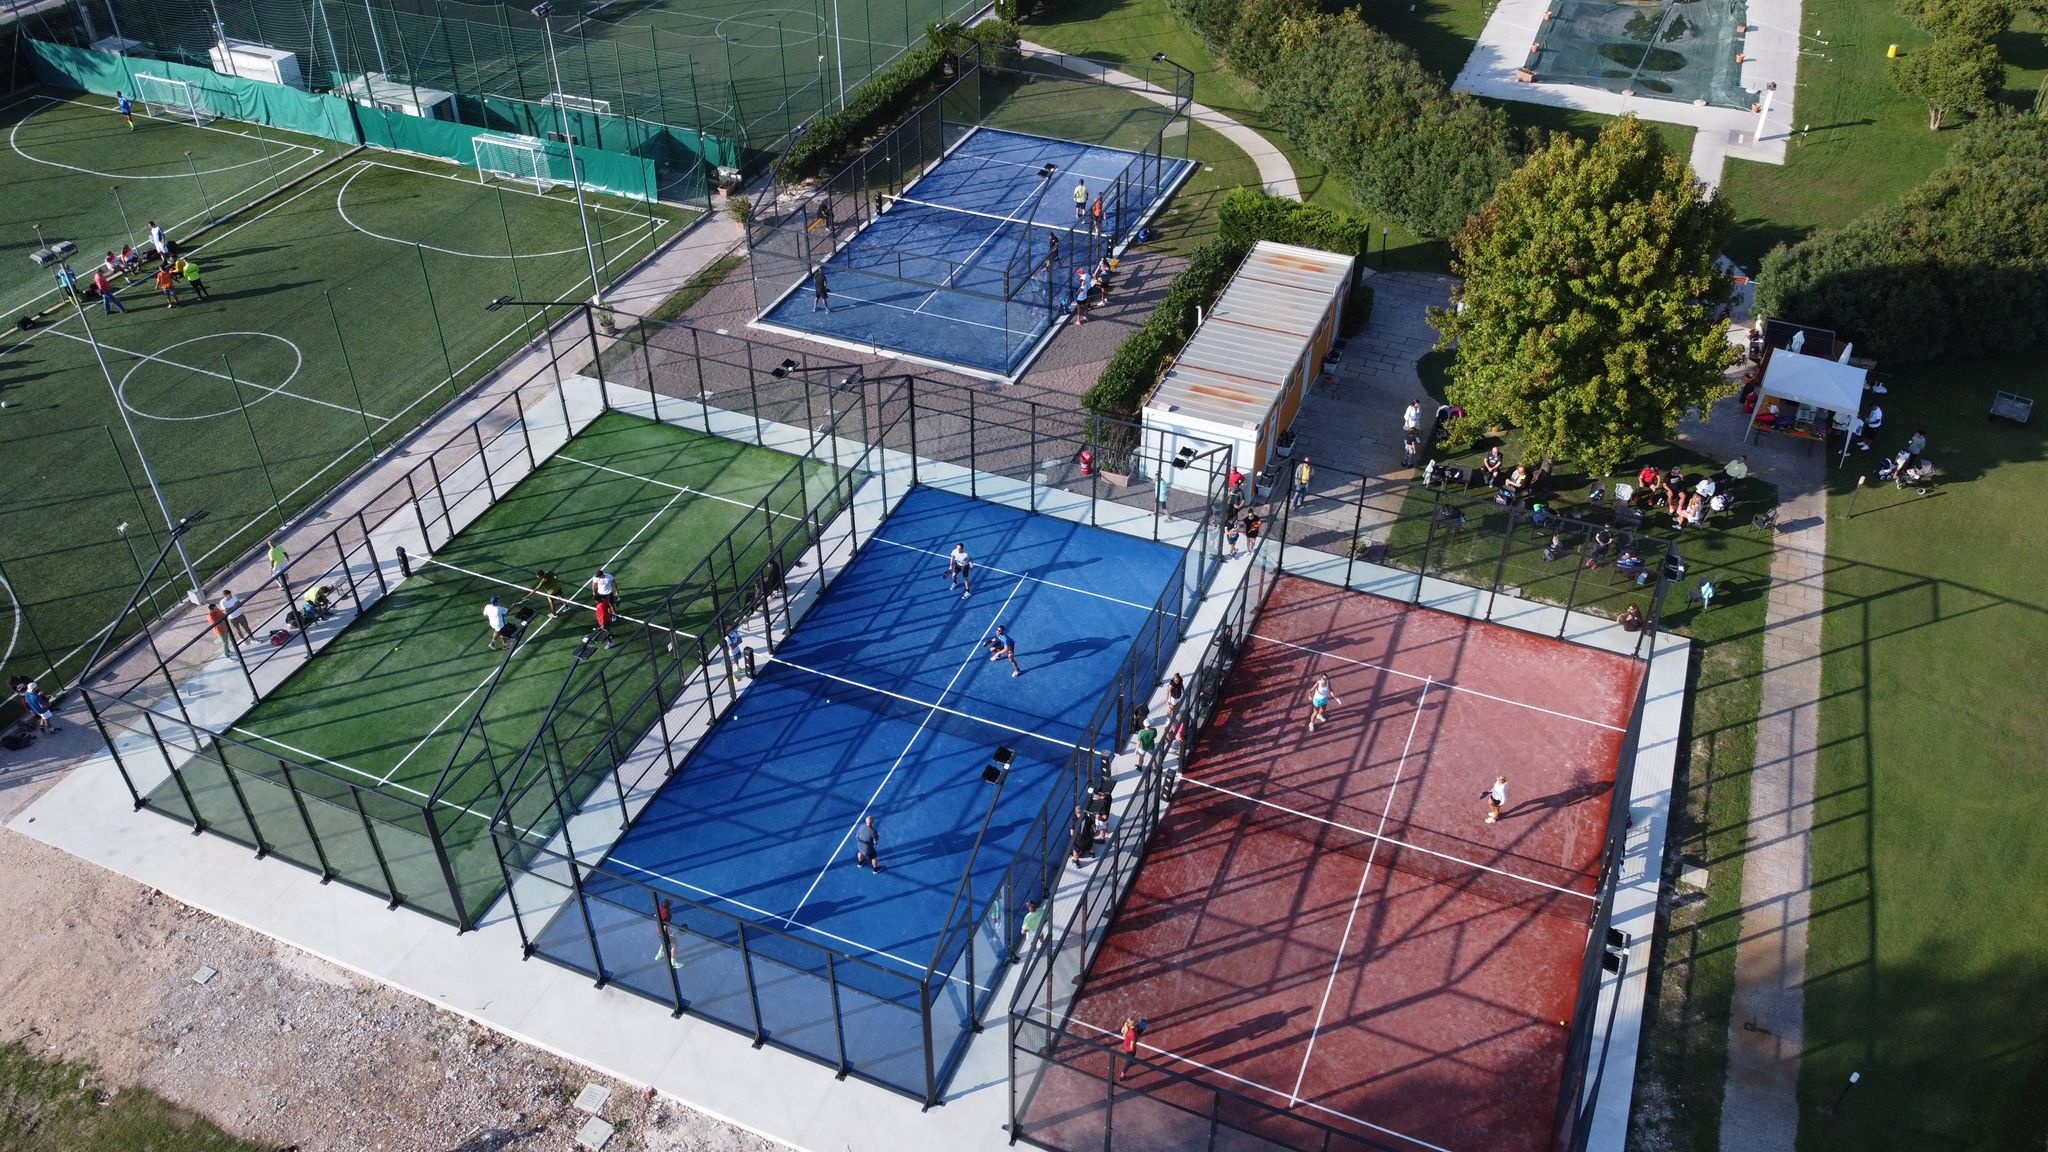 Le padel reached new heights in Sweden and Spain!